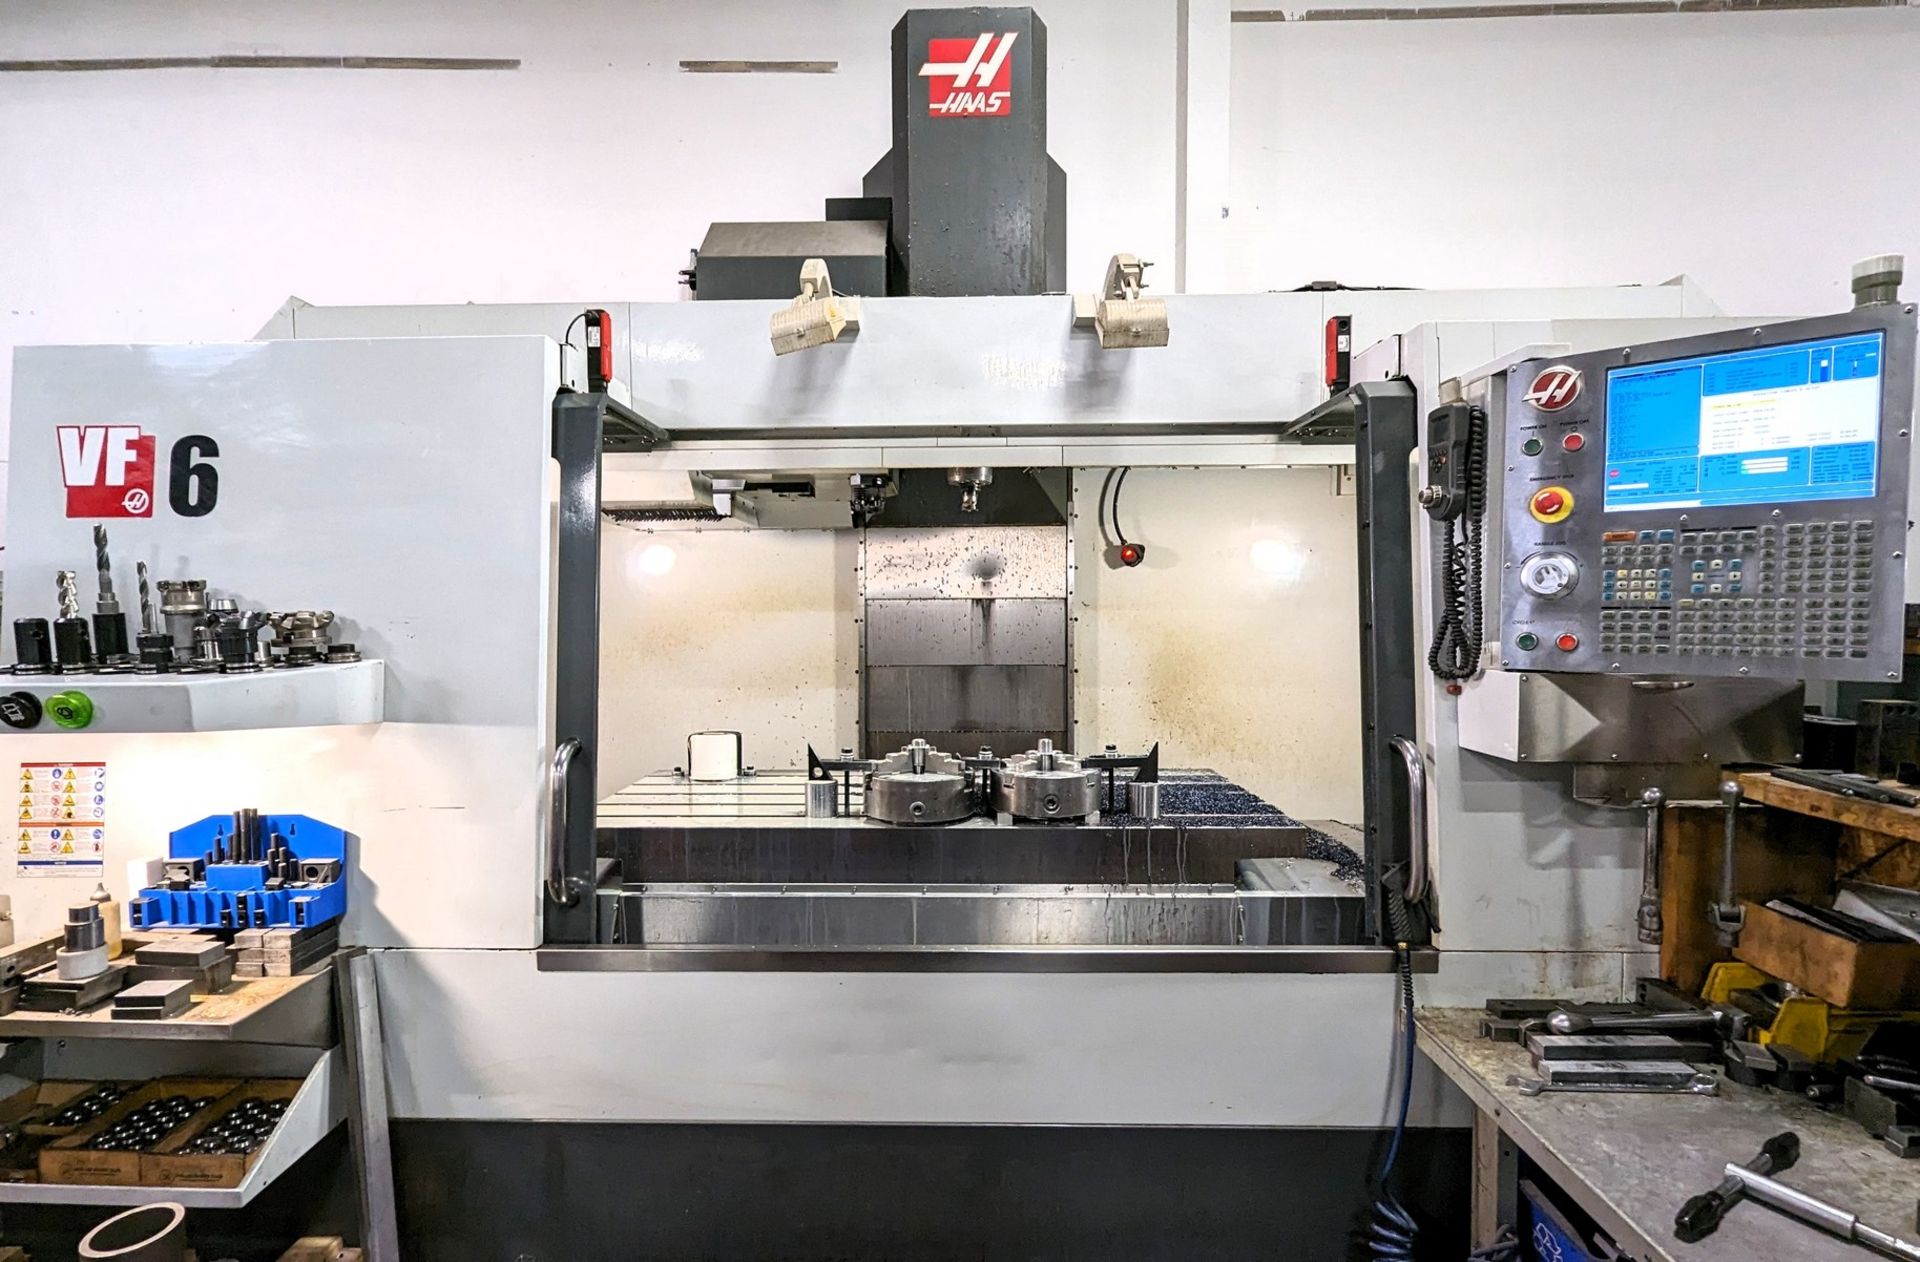 2012 HAAS VF6/40 CNC VERTICAL MACHINING CENTER, CNC CONTROL, 24” X 60” TABLE, 40 TAPER, 10,000 RPM - Image 2 of 19